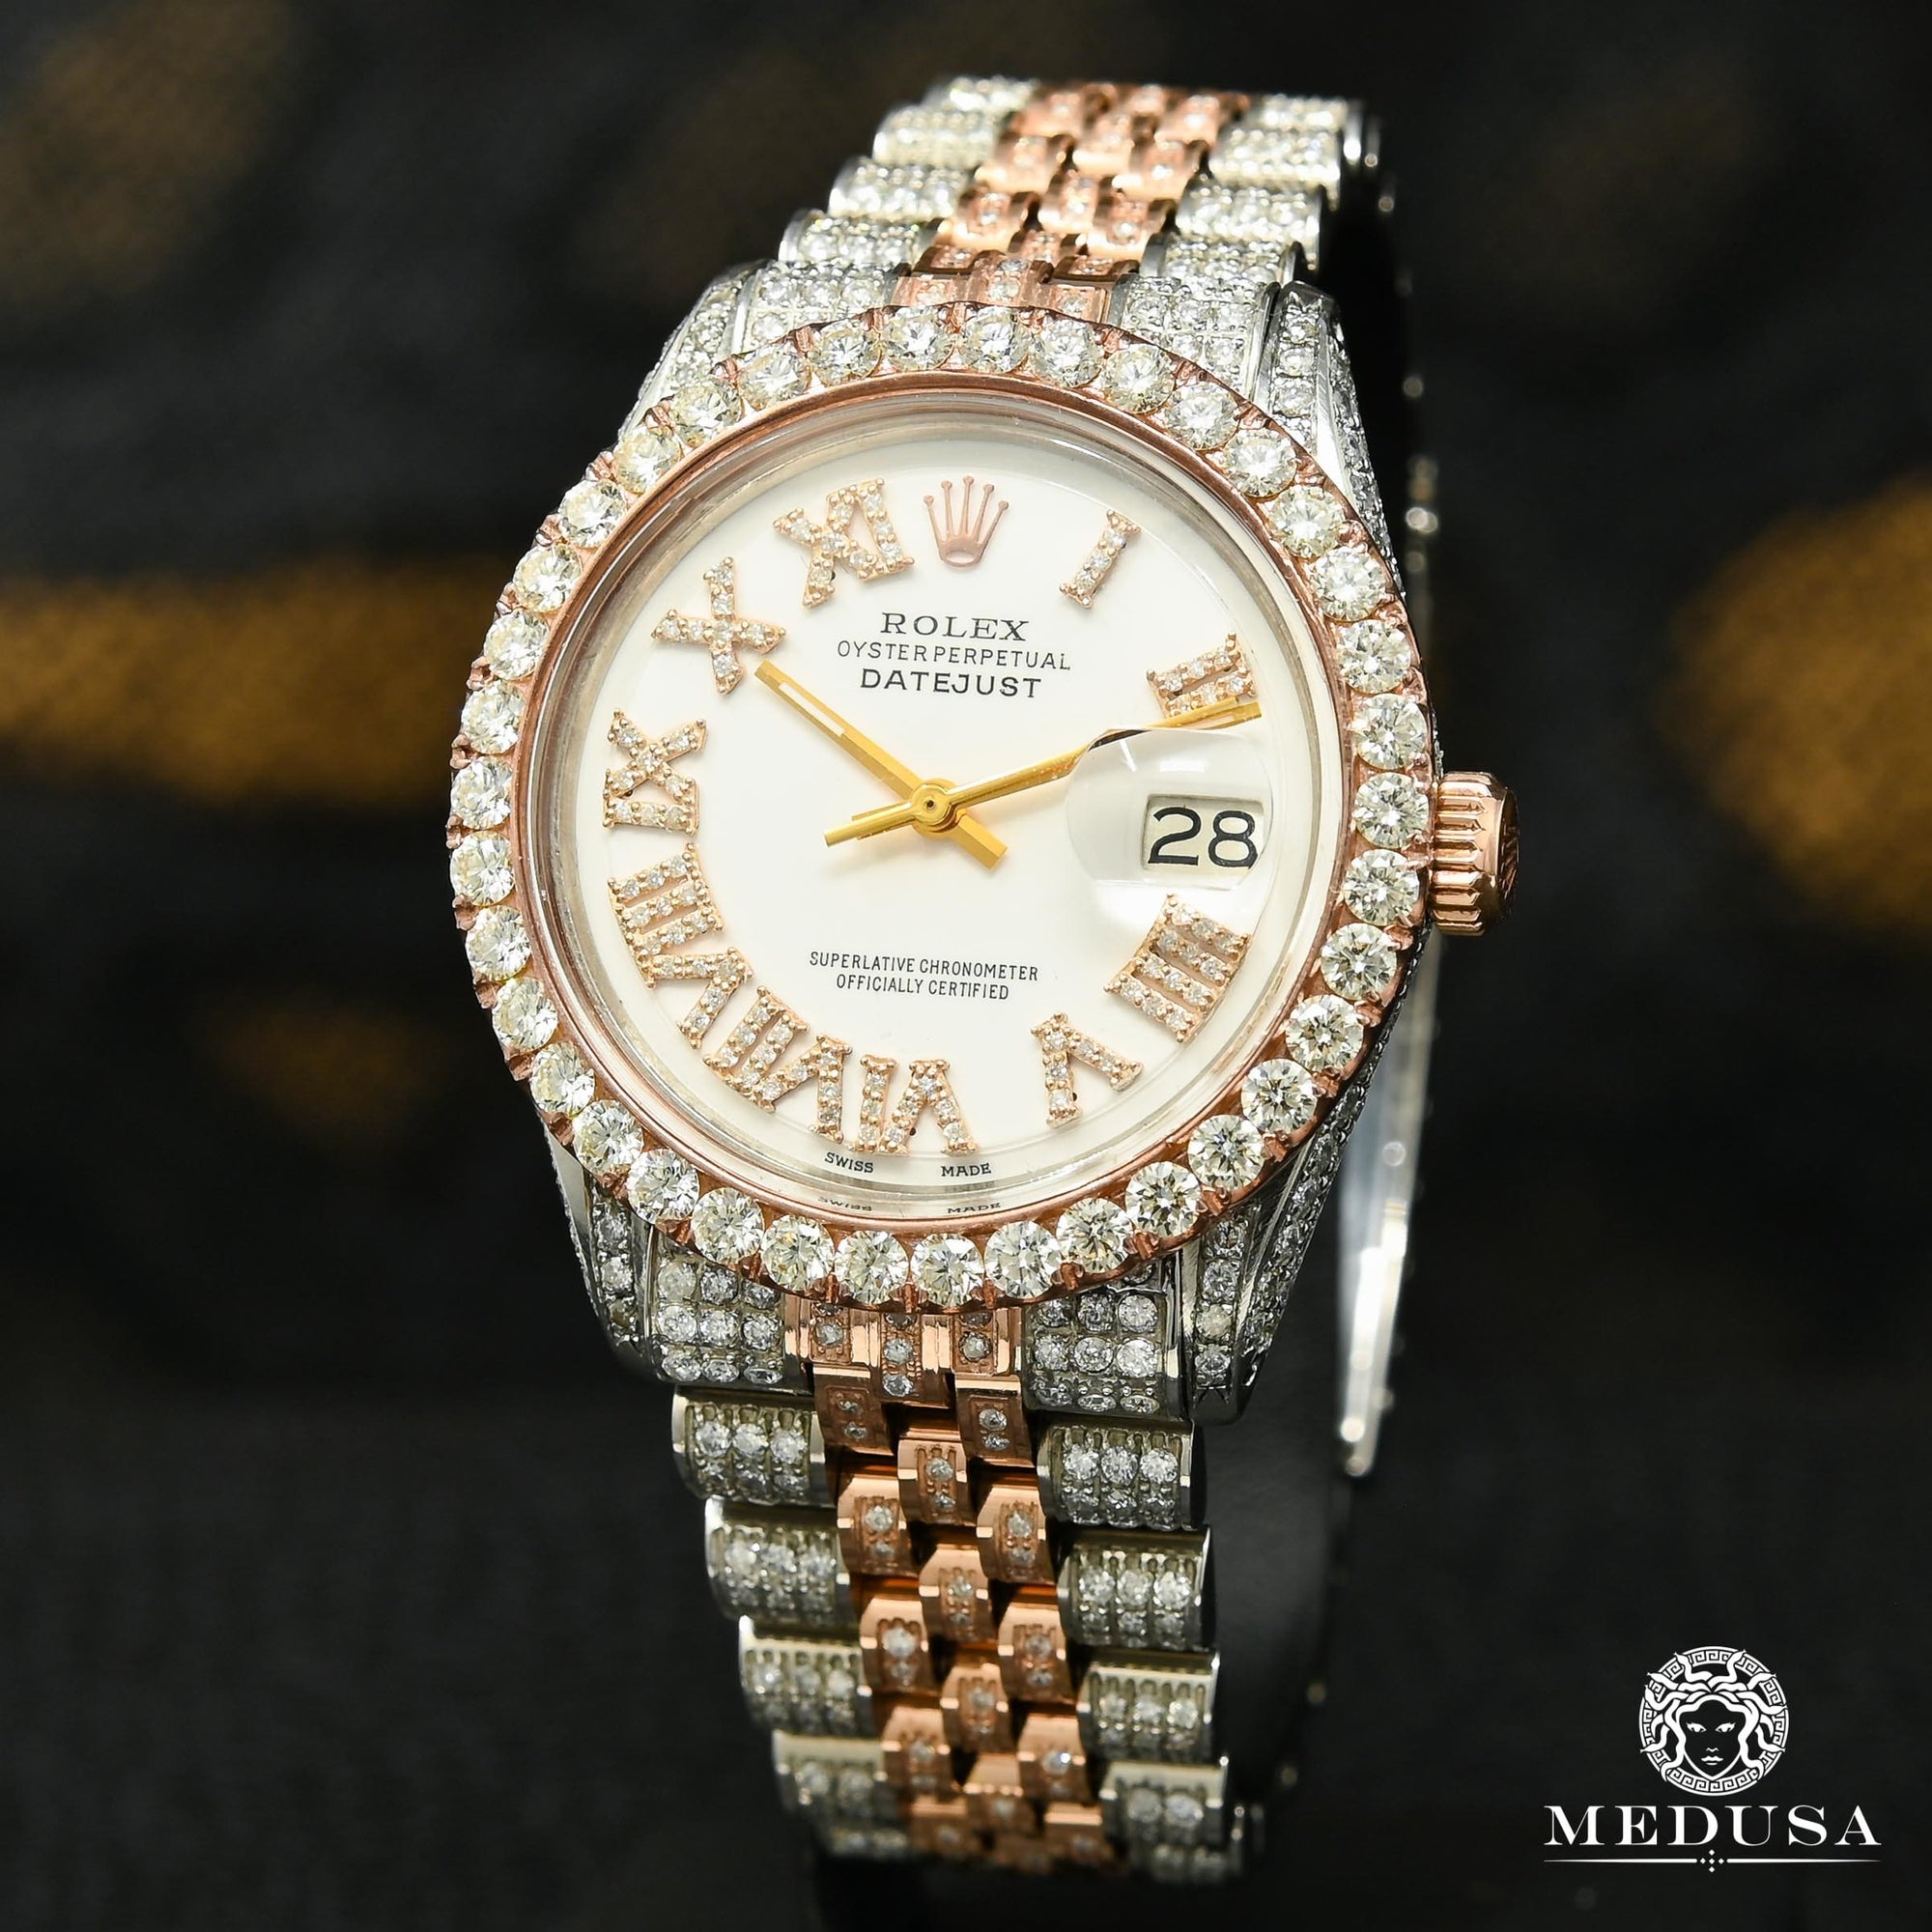 Montre Rolex | Montre Homme Datejust 36mm - Rose 2 Tons Full Iced Or Rose 2 Tons